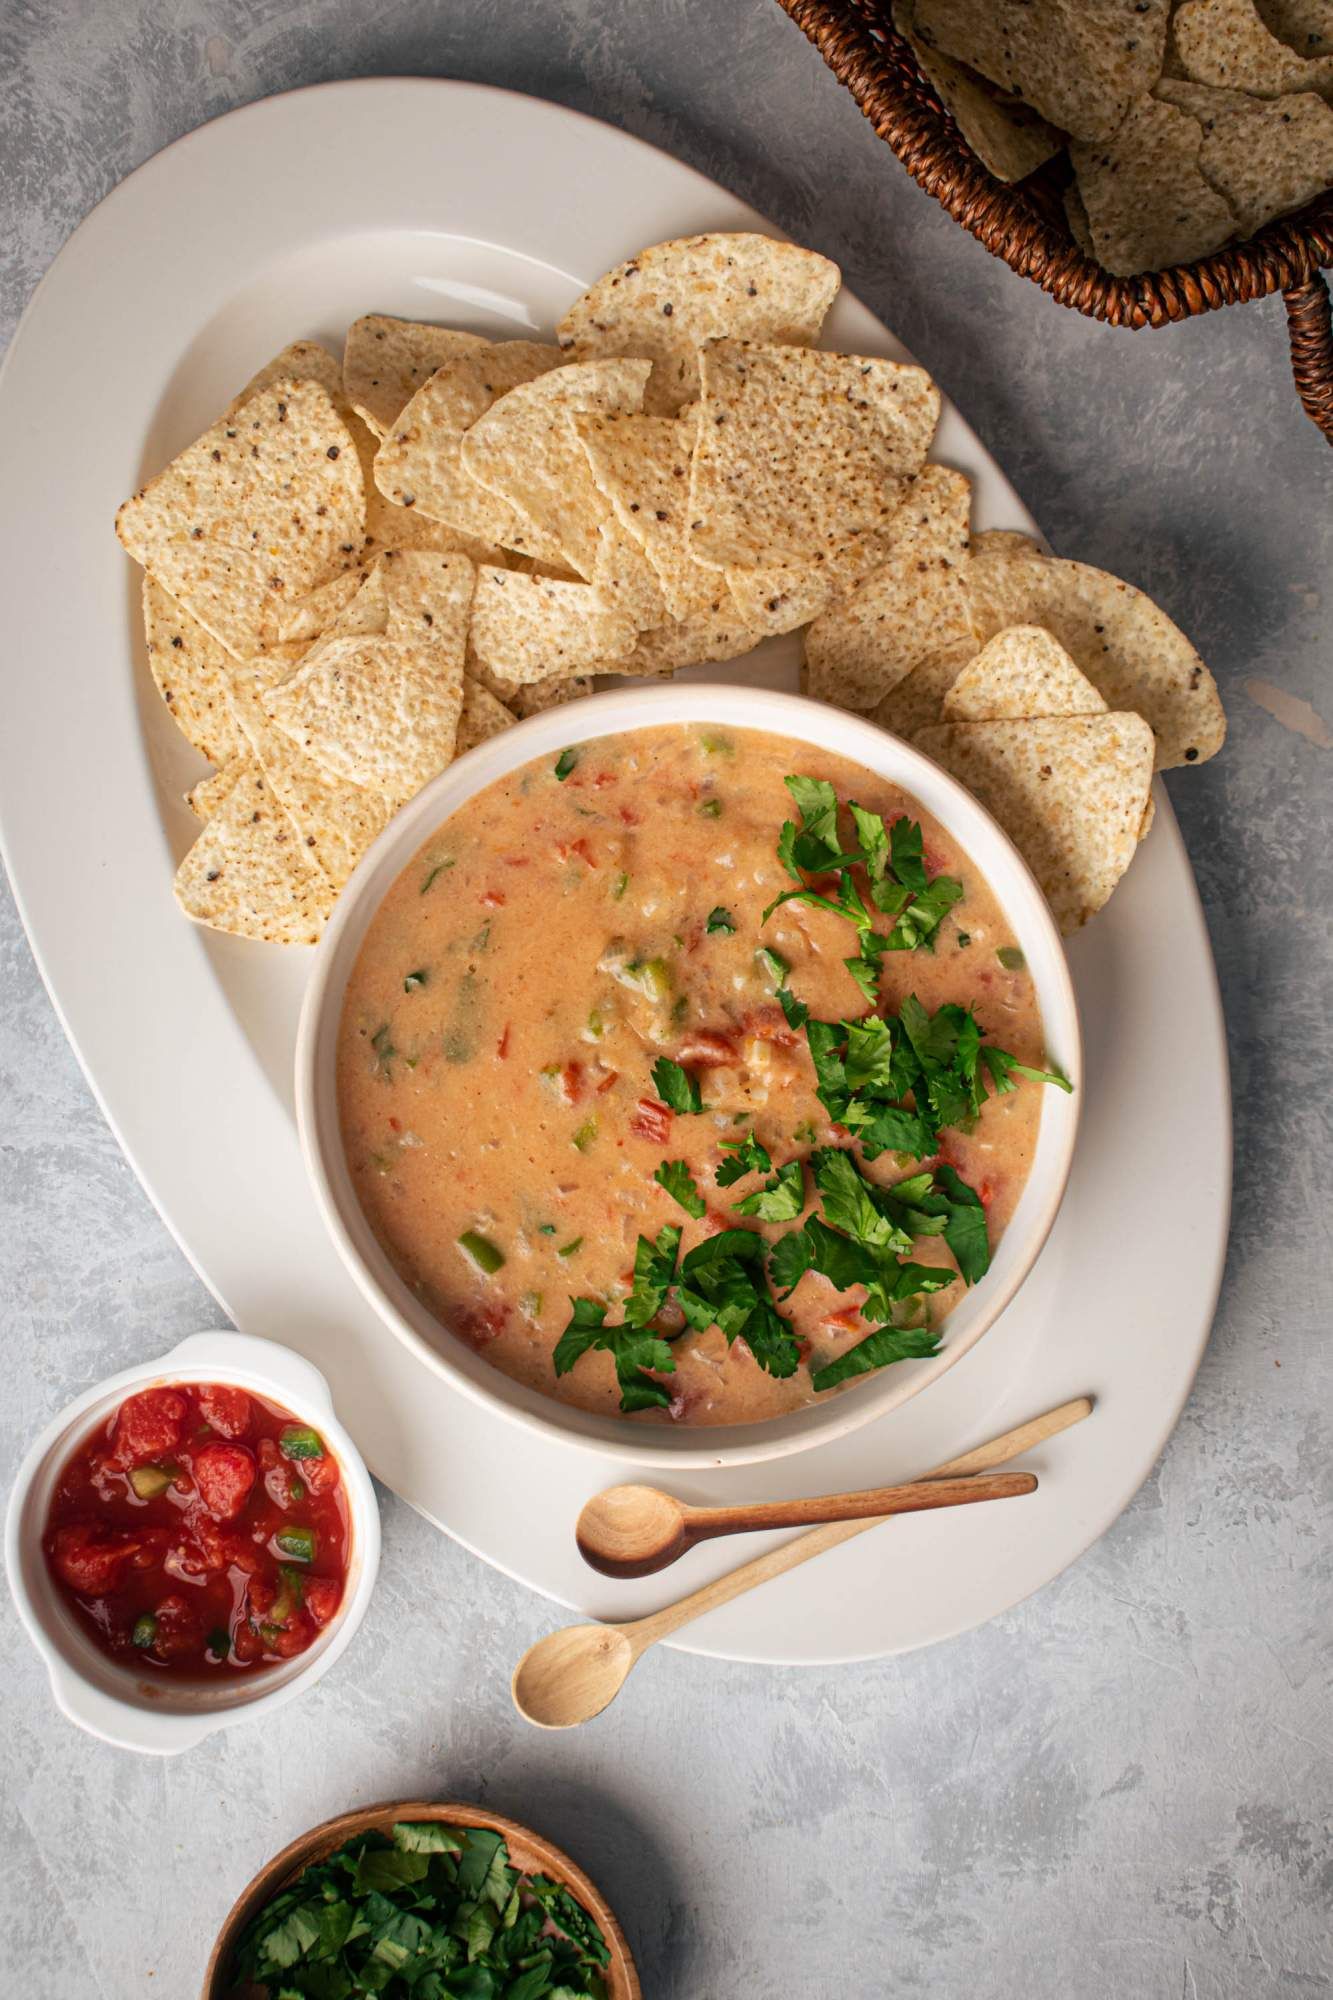 Queso dip with melted cheddar, cheese, diced tomatoes, green chilies, and cilantro on a plate with tortilla chips and cilantro.